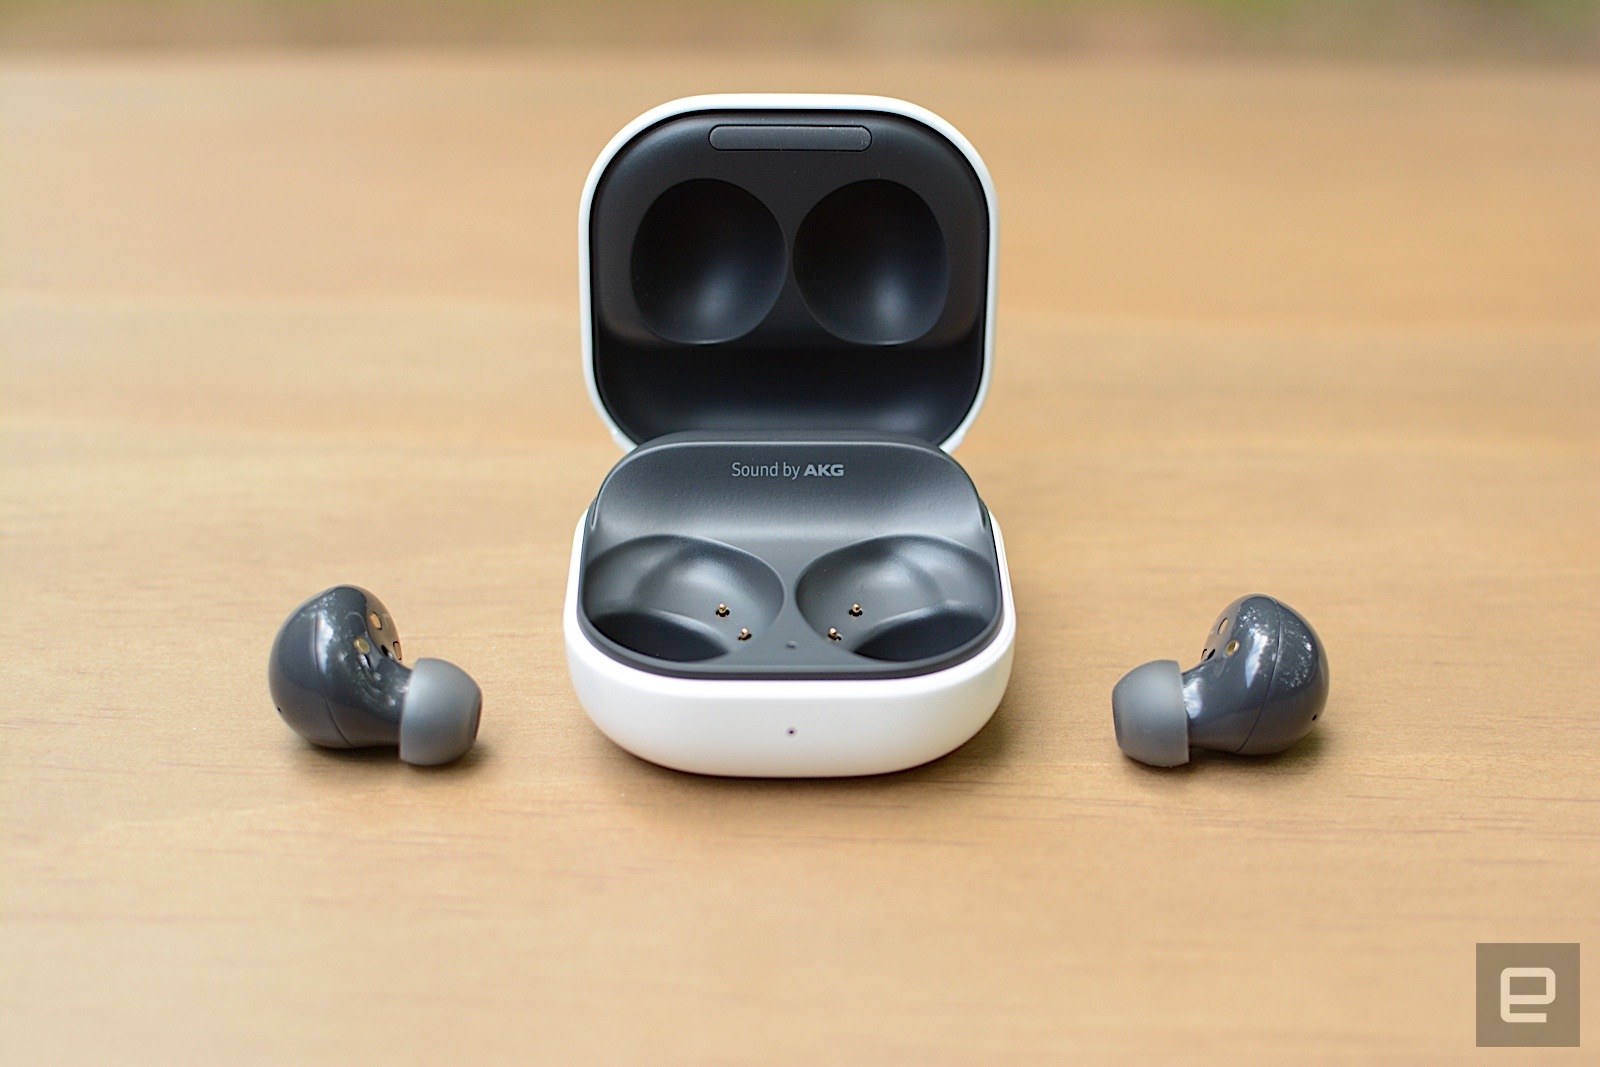 With the Galaxy Buds 2, Samsung adds active noise cancellation to its most affordable true wireless earbuds. This successor to the Galaxy Buds+ are smaller and more comfortable with premium features like wireless charging and adjustable ambient sound. However, ANC performance is only decent and there’s no deep iOS integration like previous models. Still, at this price, Samsung has created a compelling package despite the sacrifices. | DeviceDaily.com